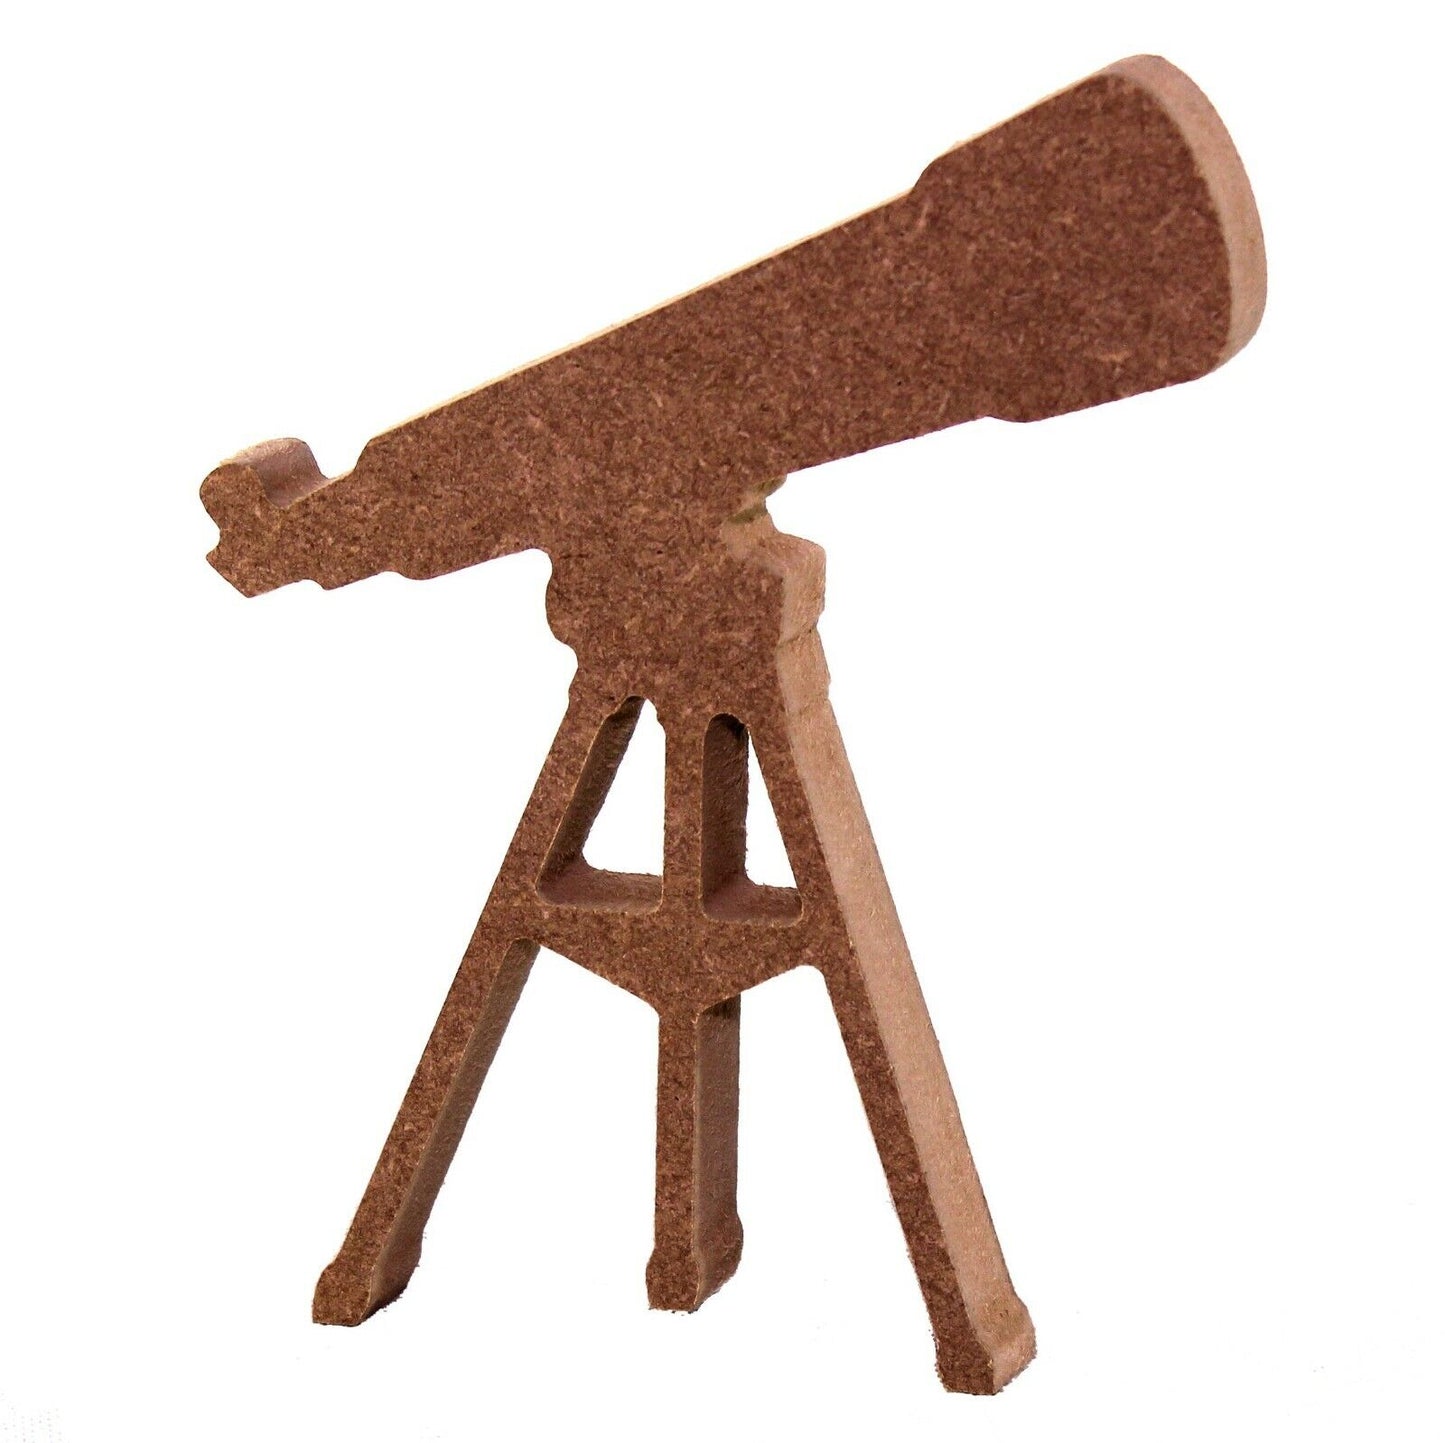 Free Standing 18mm MDF Telescope Craft Shape Various Sizes. Astronomy, space